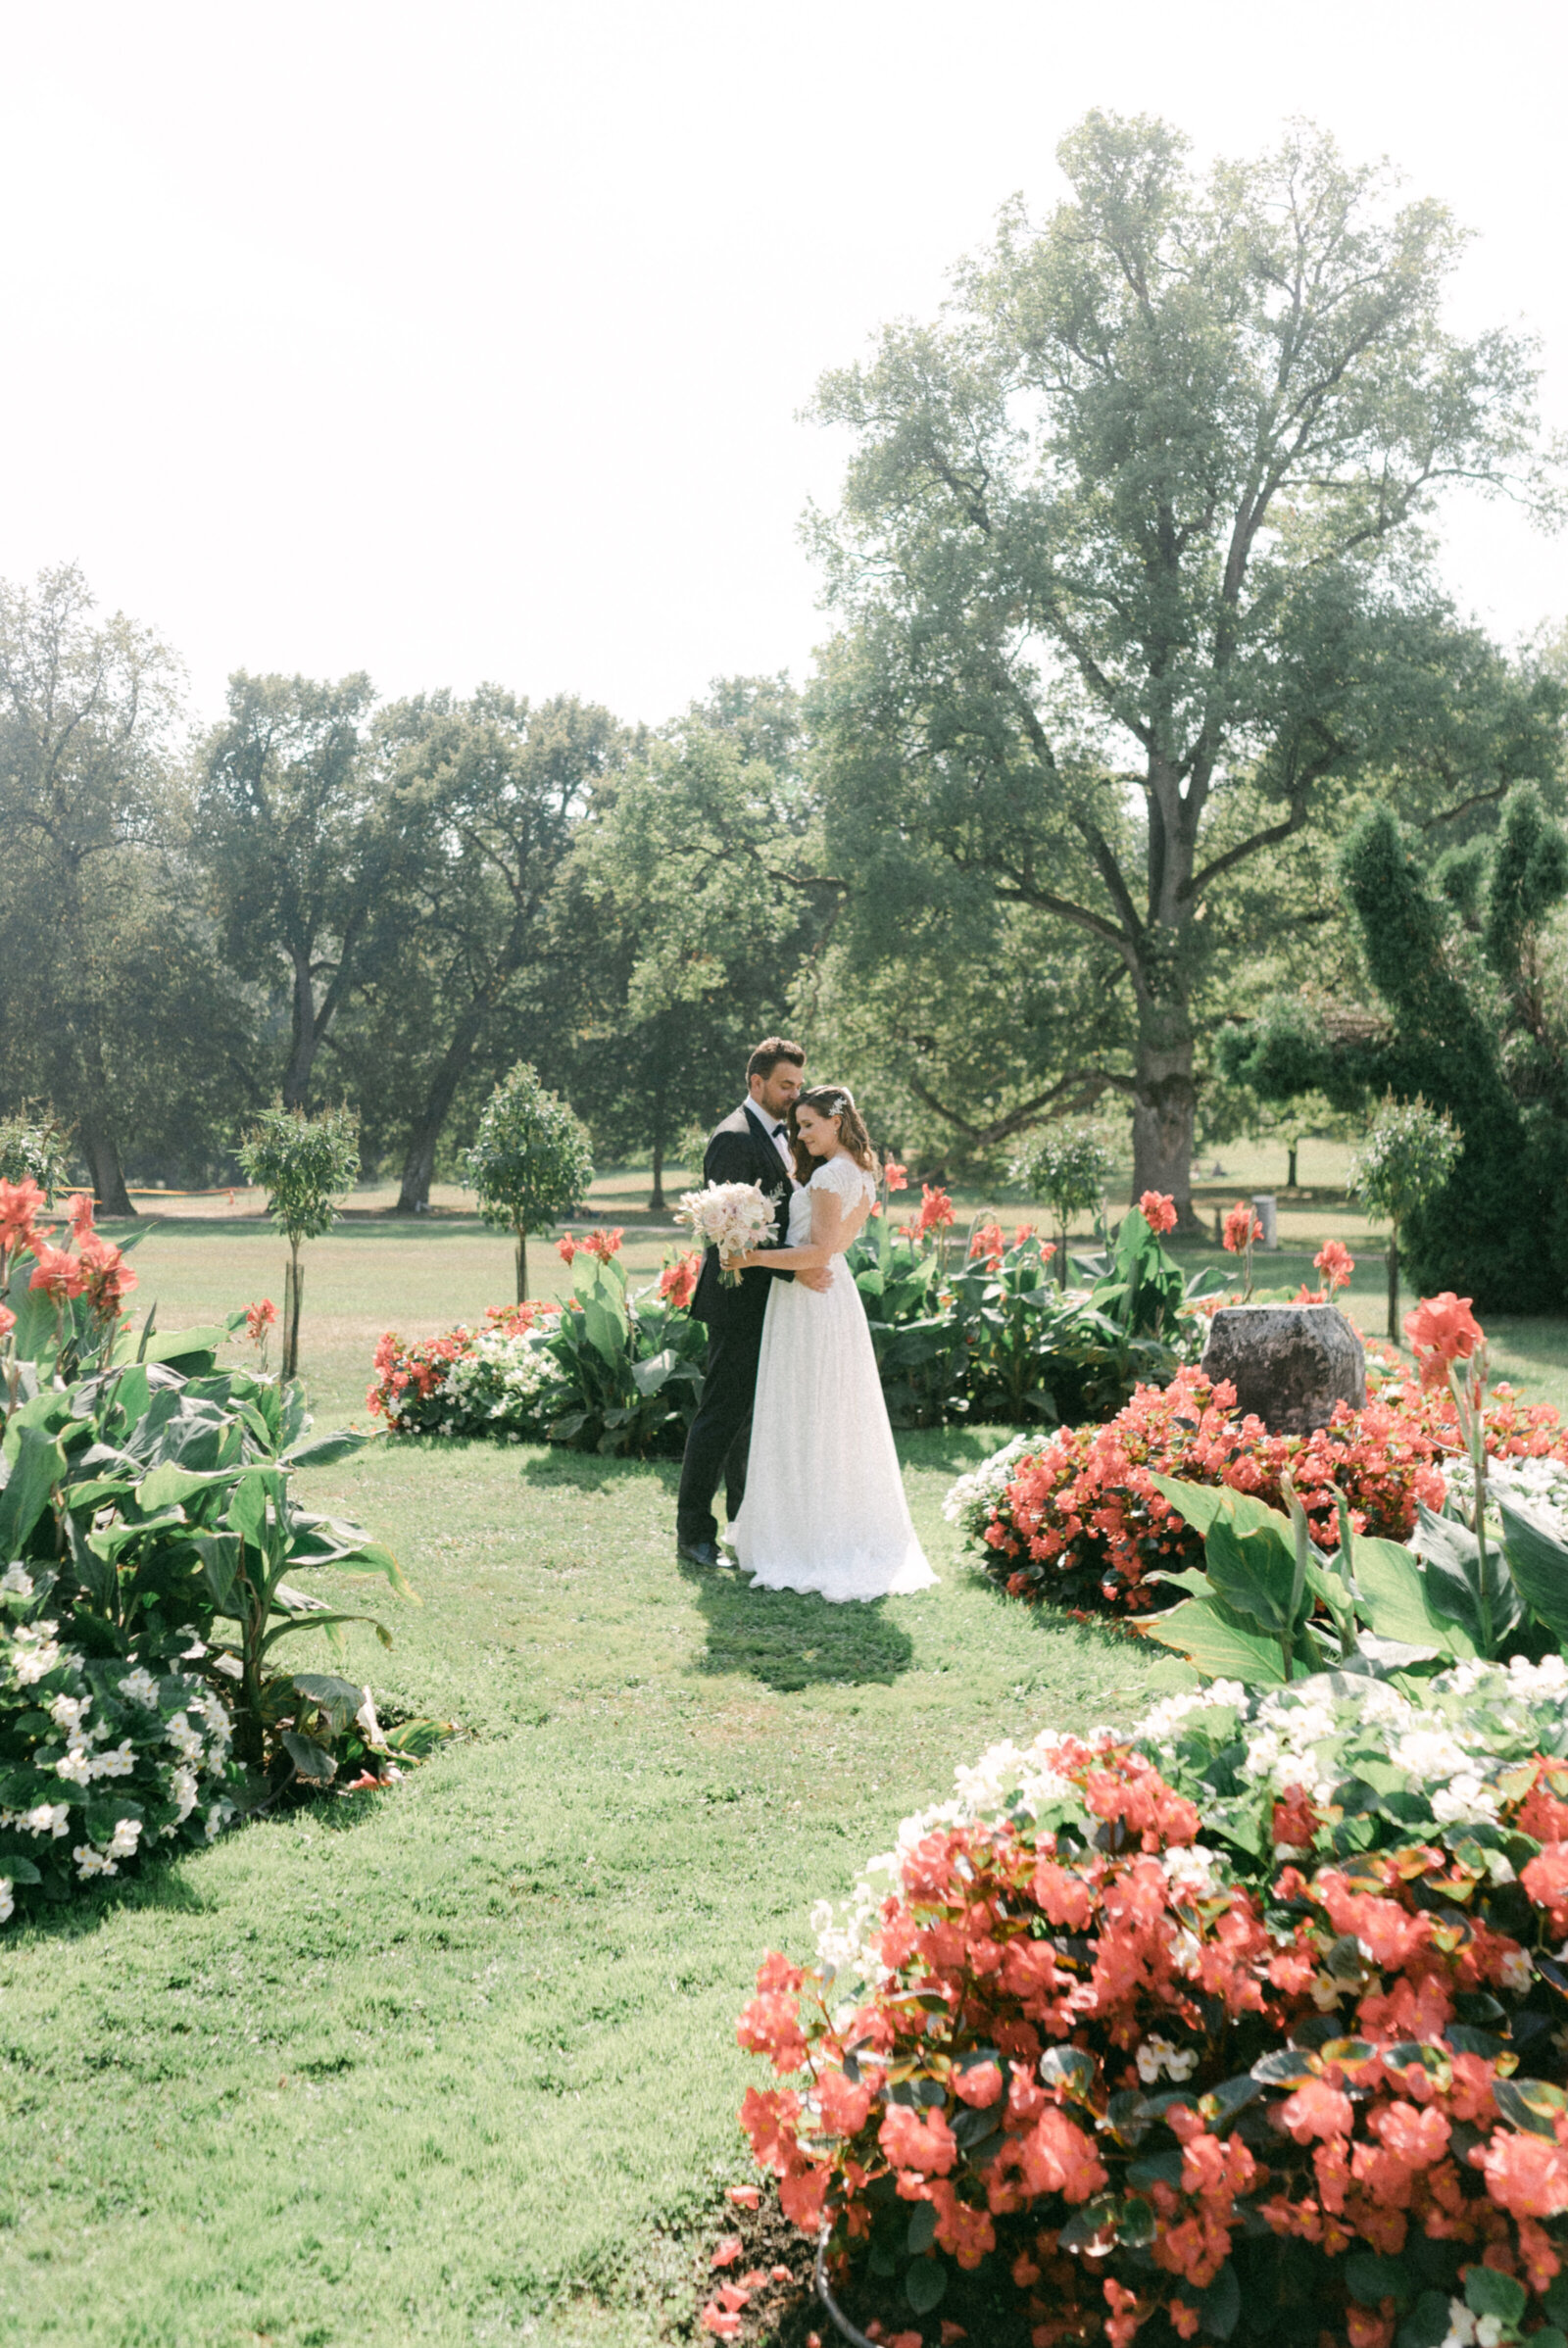 A wedding couple in the middle of flower plantations in the summer. An elopement photograph captured by Finnish wedding phootgraoher  Hannika Gabrielsson.